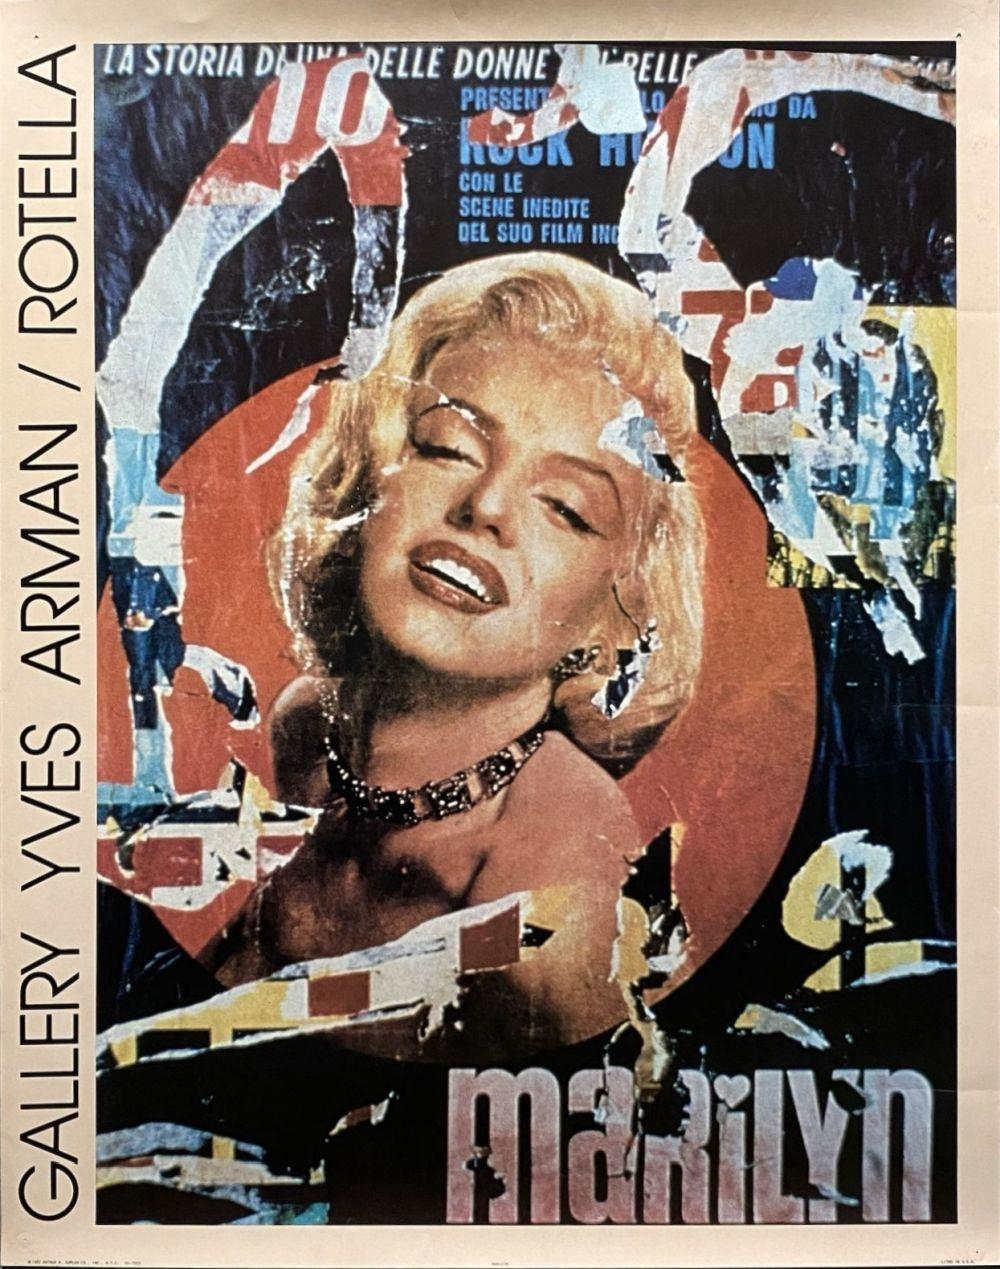 Marilyn, 1982 by Mimmo Rotella, 1982